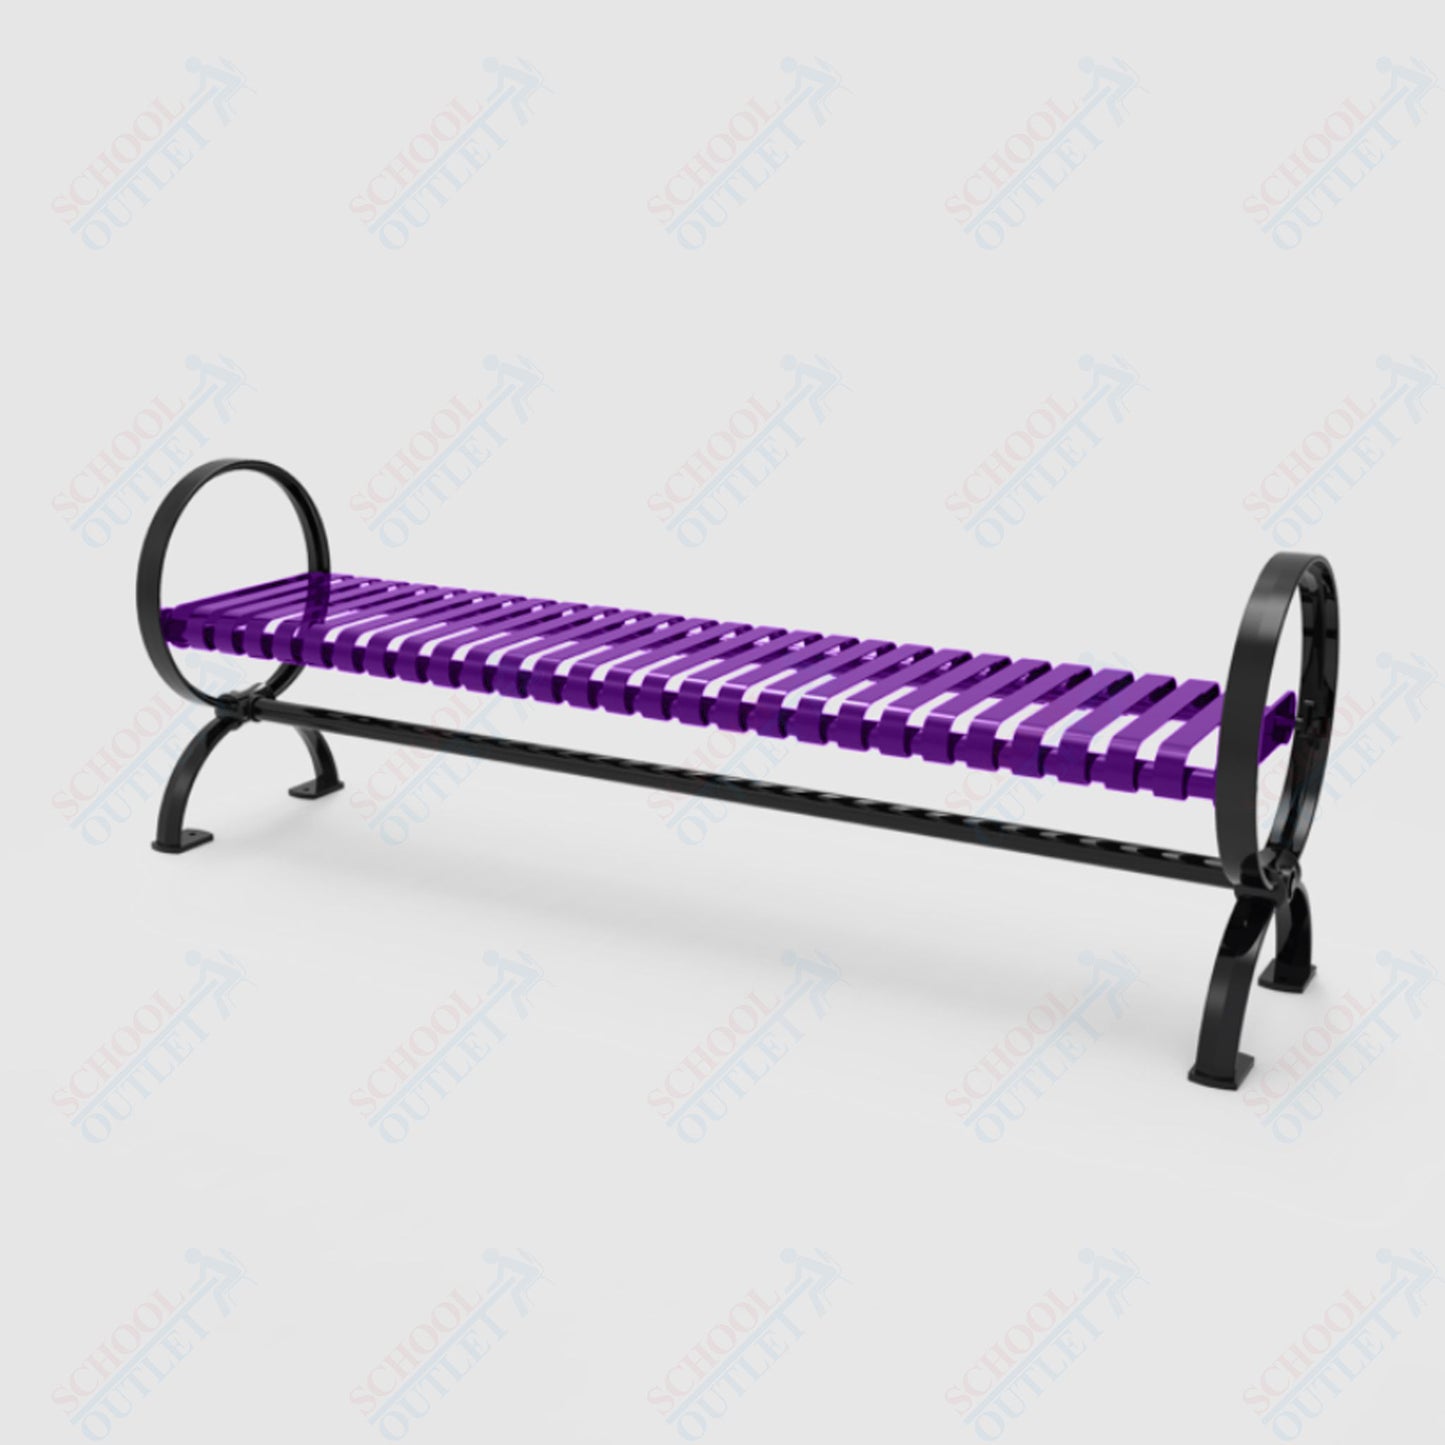 MyTcoat - Skyline Outdoor Bench with Arched Back - Portable or Surface Mount 6' L (MYT-BSL06-O-57)